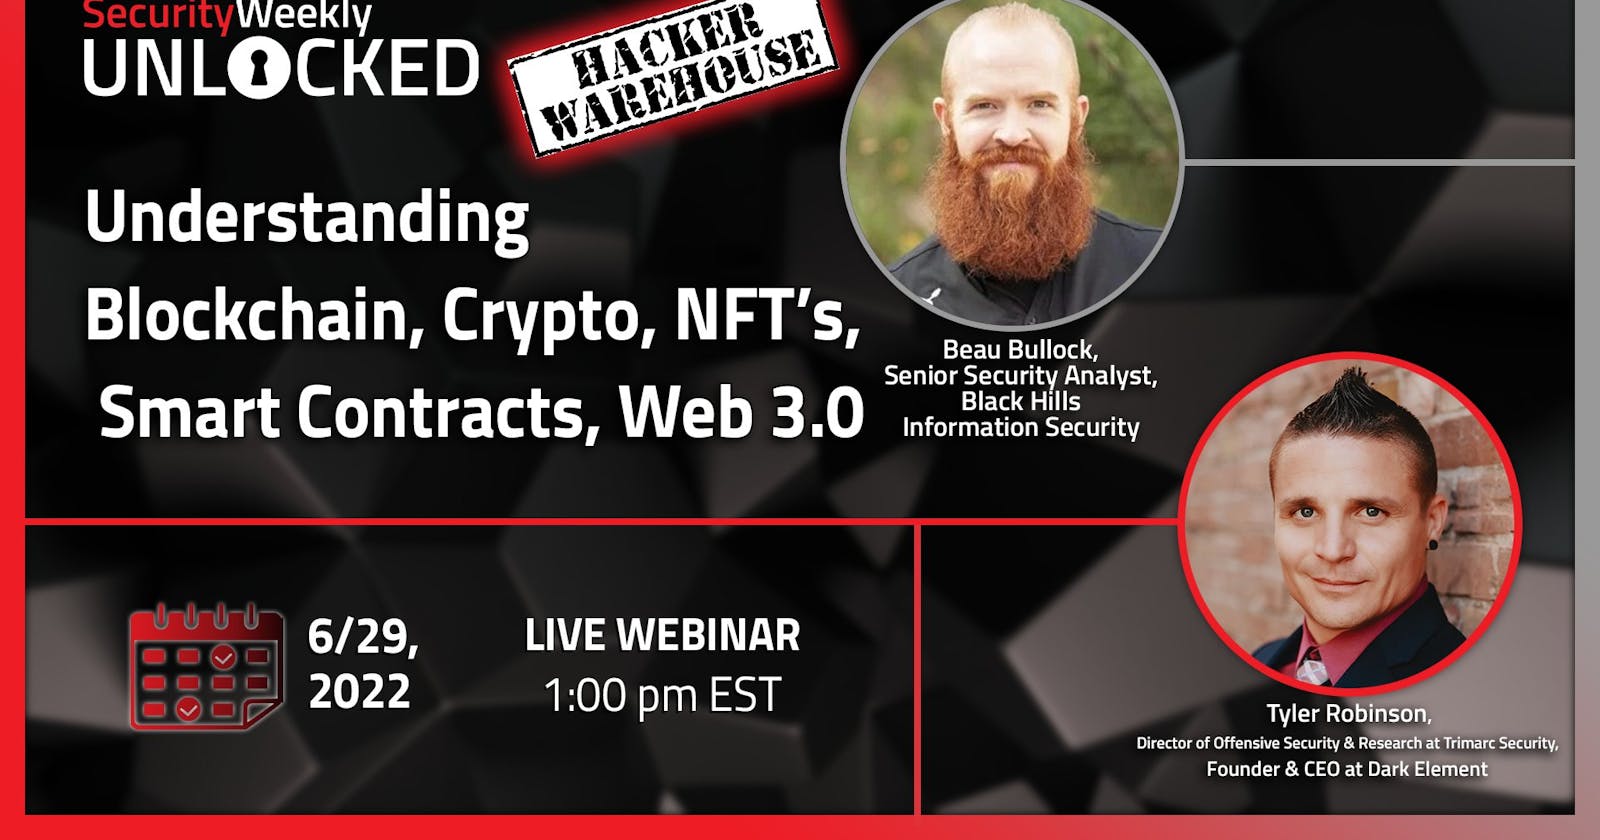 Understanding Blockchain, Crypto, NFTs, Smart Contracts, Web 3.0 from Hacker’s View